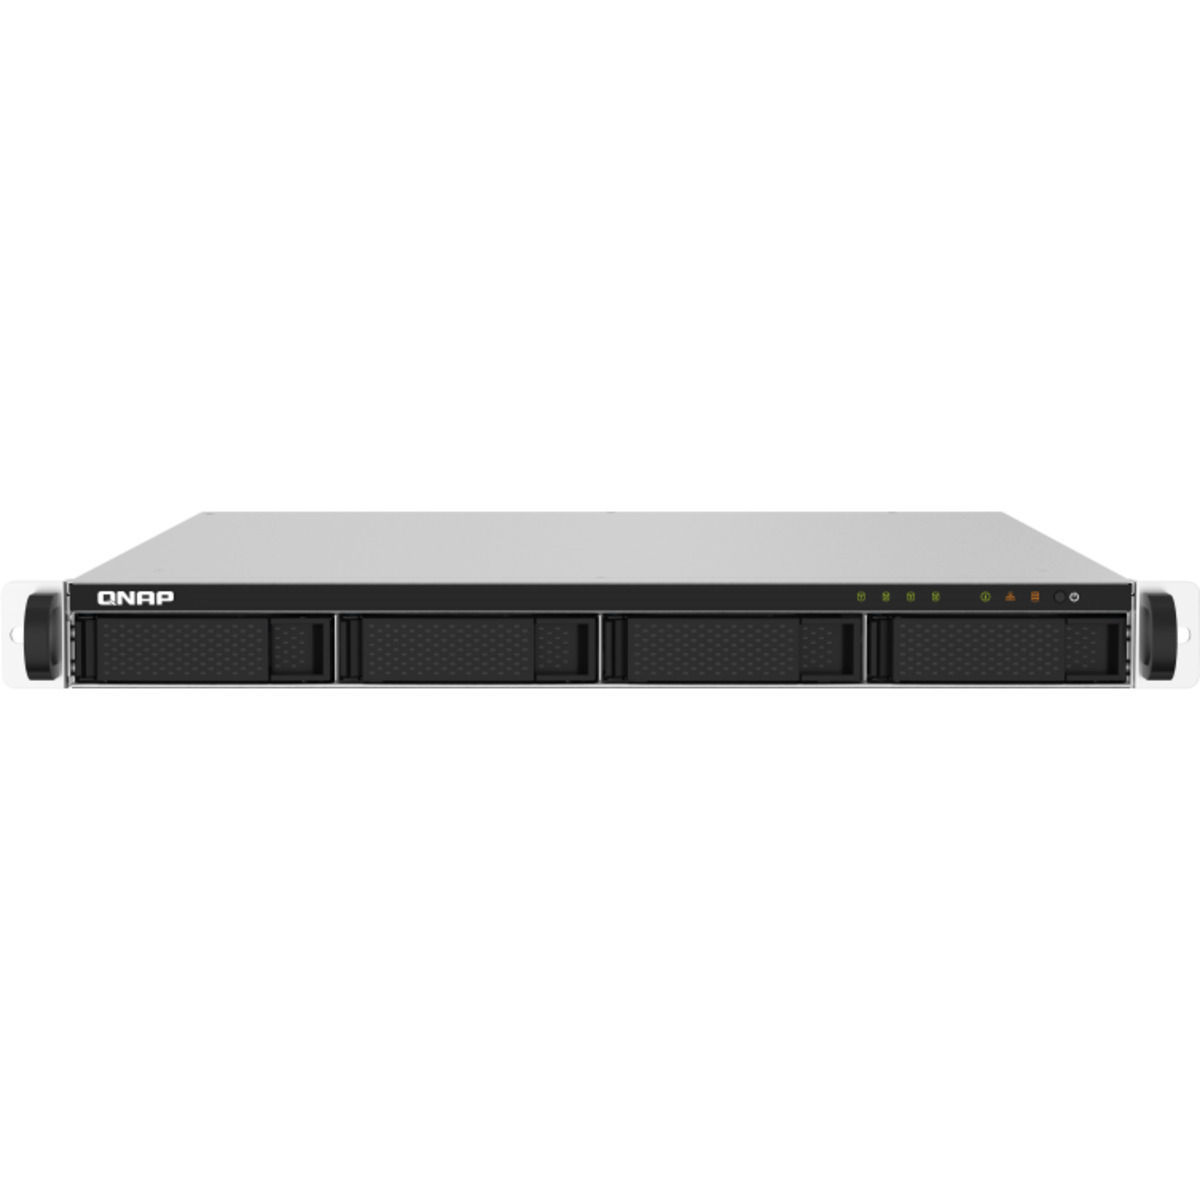 buy $1752 QNAP TS-432PXU-RP 24tb RackMount NAS - Network Attached Storage Device 4x6000gb Western Digital Blue WD60EZAZ 3.5 5400rpm SATA 6Gb/s HDD CONSUMER Class Drives Installed - Burn-In Tested - FREE RAM UPGRADE - nas headquarters buy network attached storage server device das new raid-5 free shipping usa christmas new year holiday sale TS-432PXU-RP